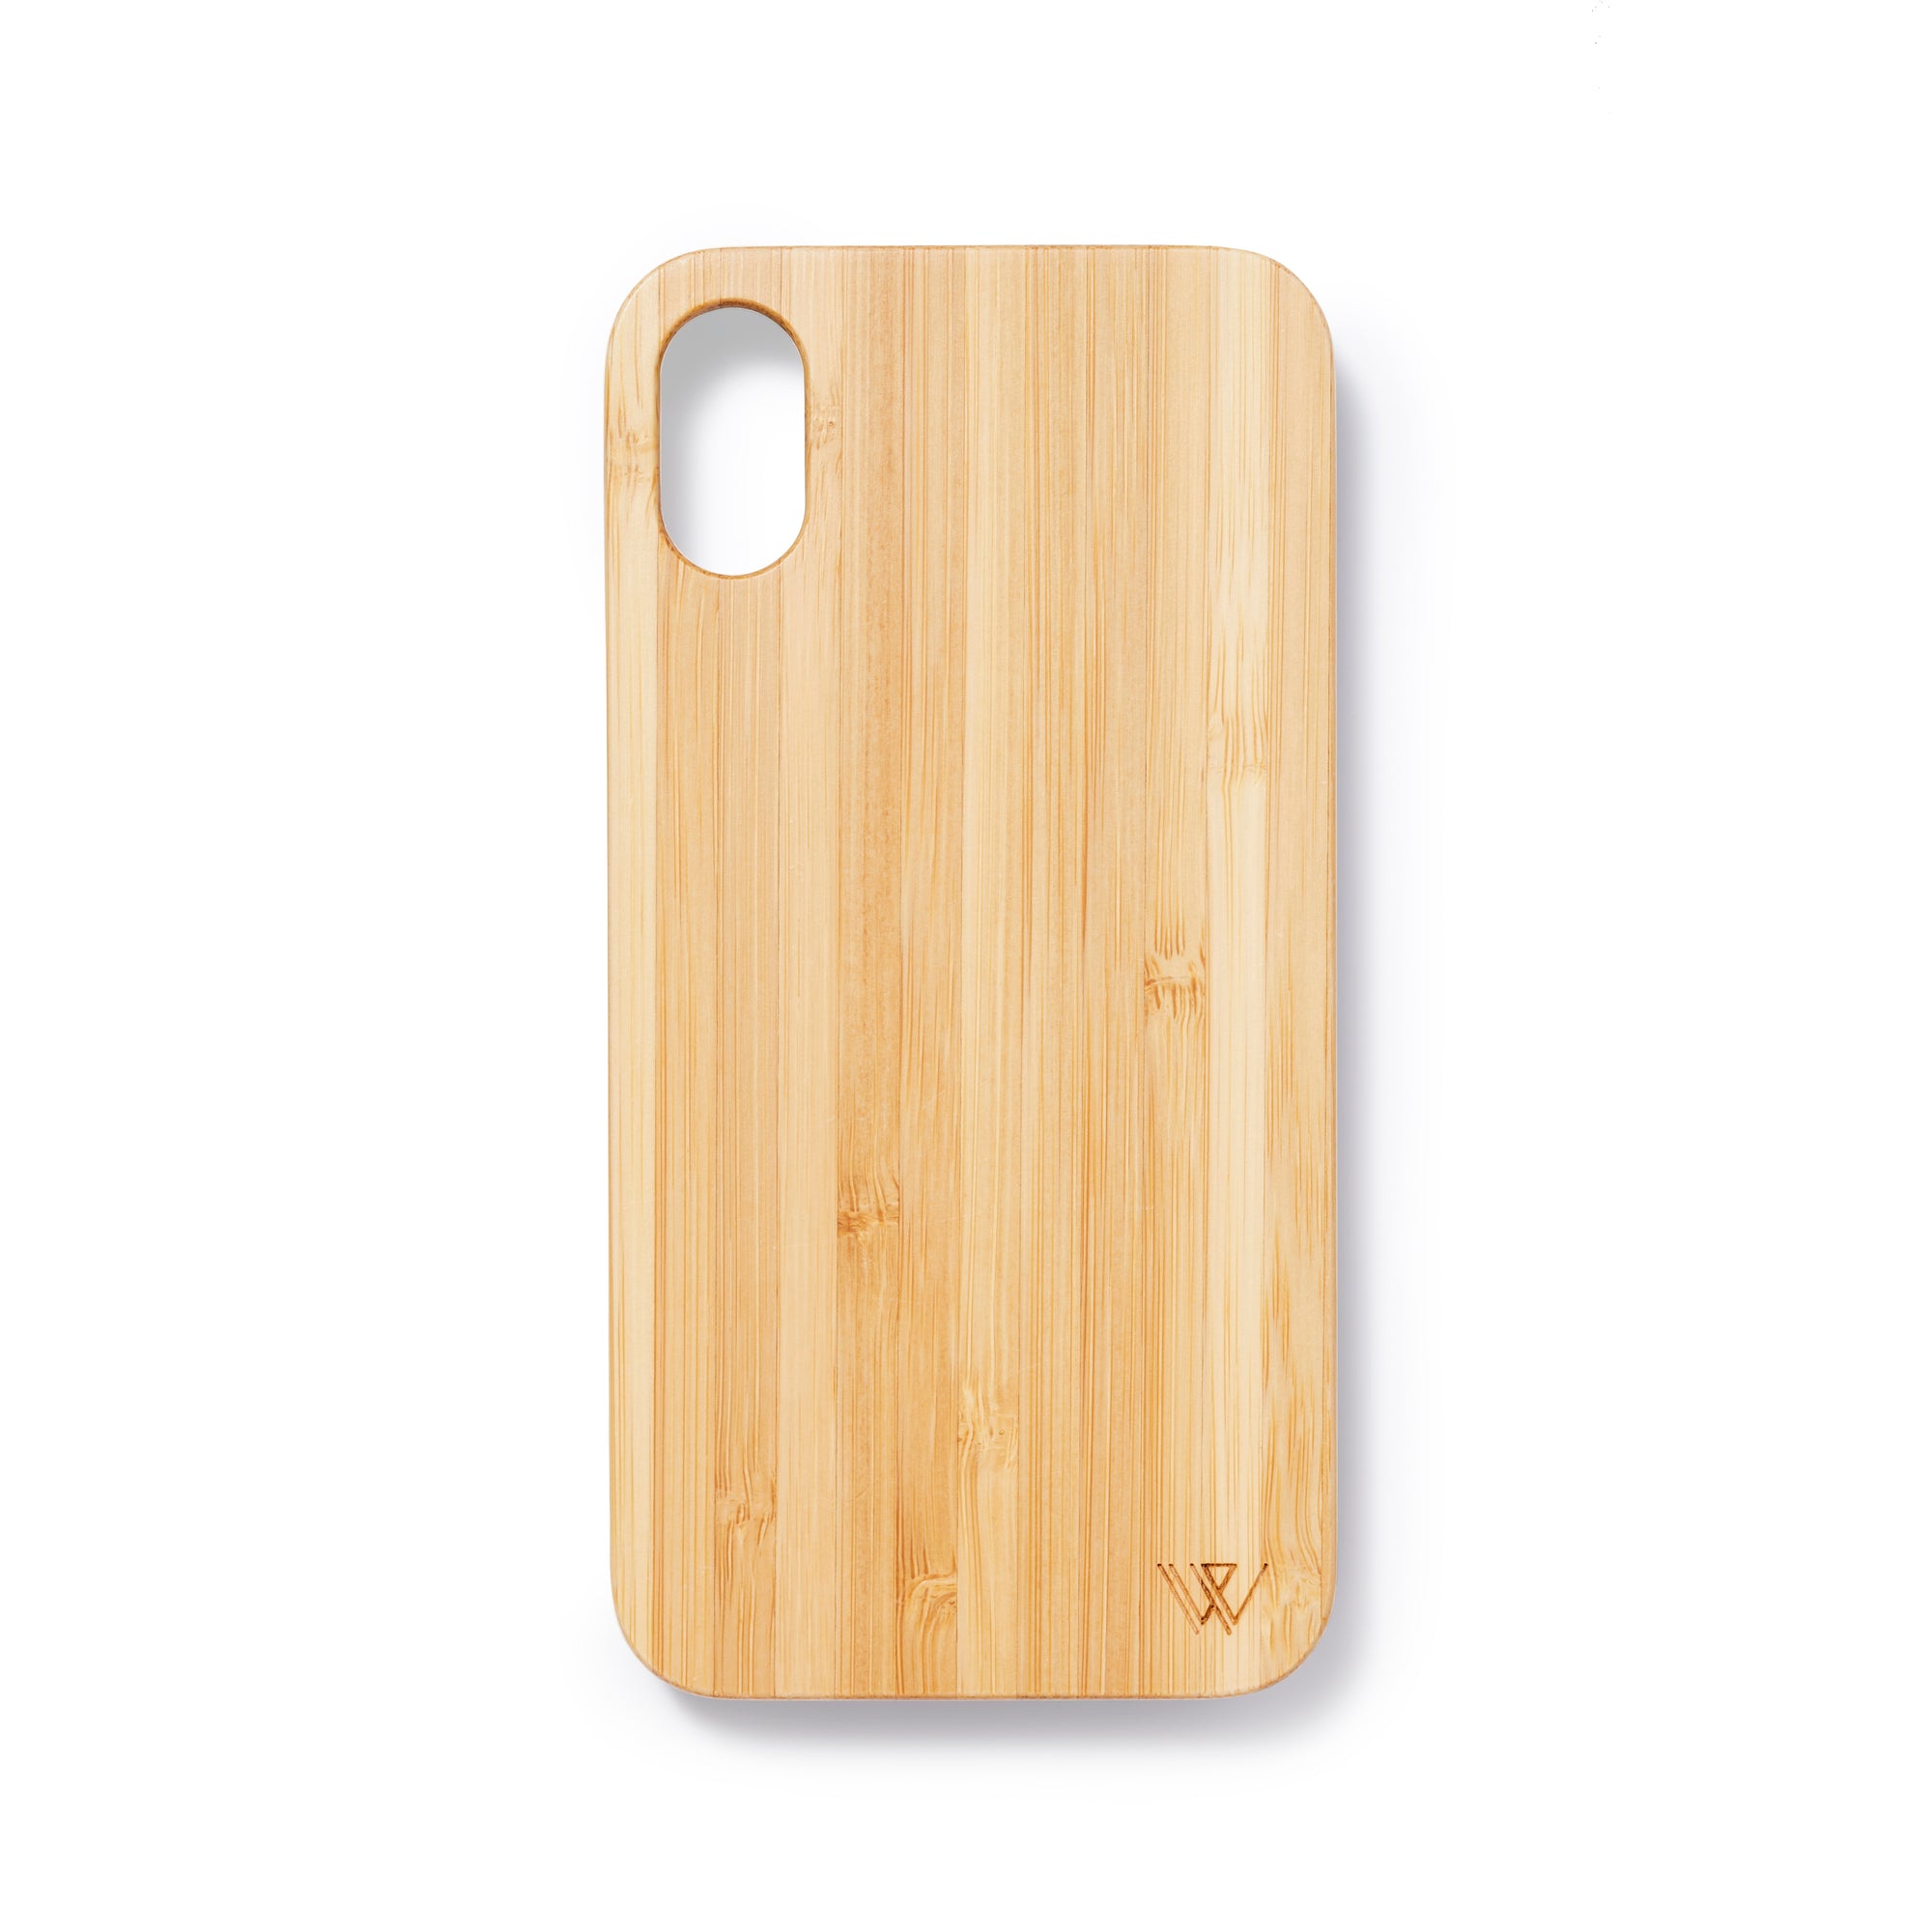 Wooden Iphone X back case bamboo - Woodstylz